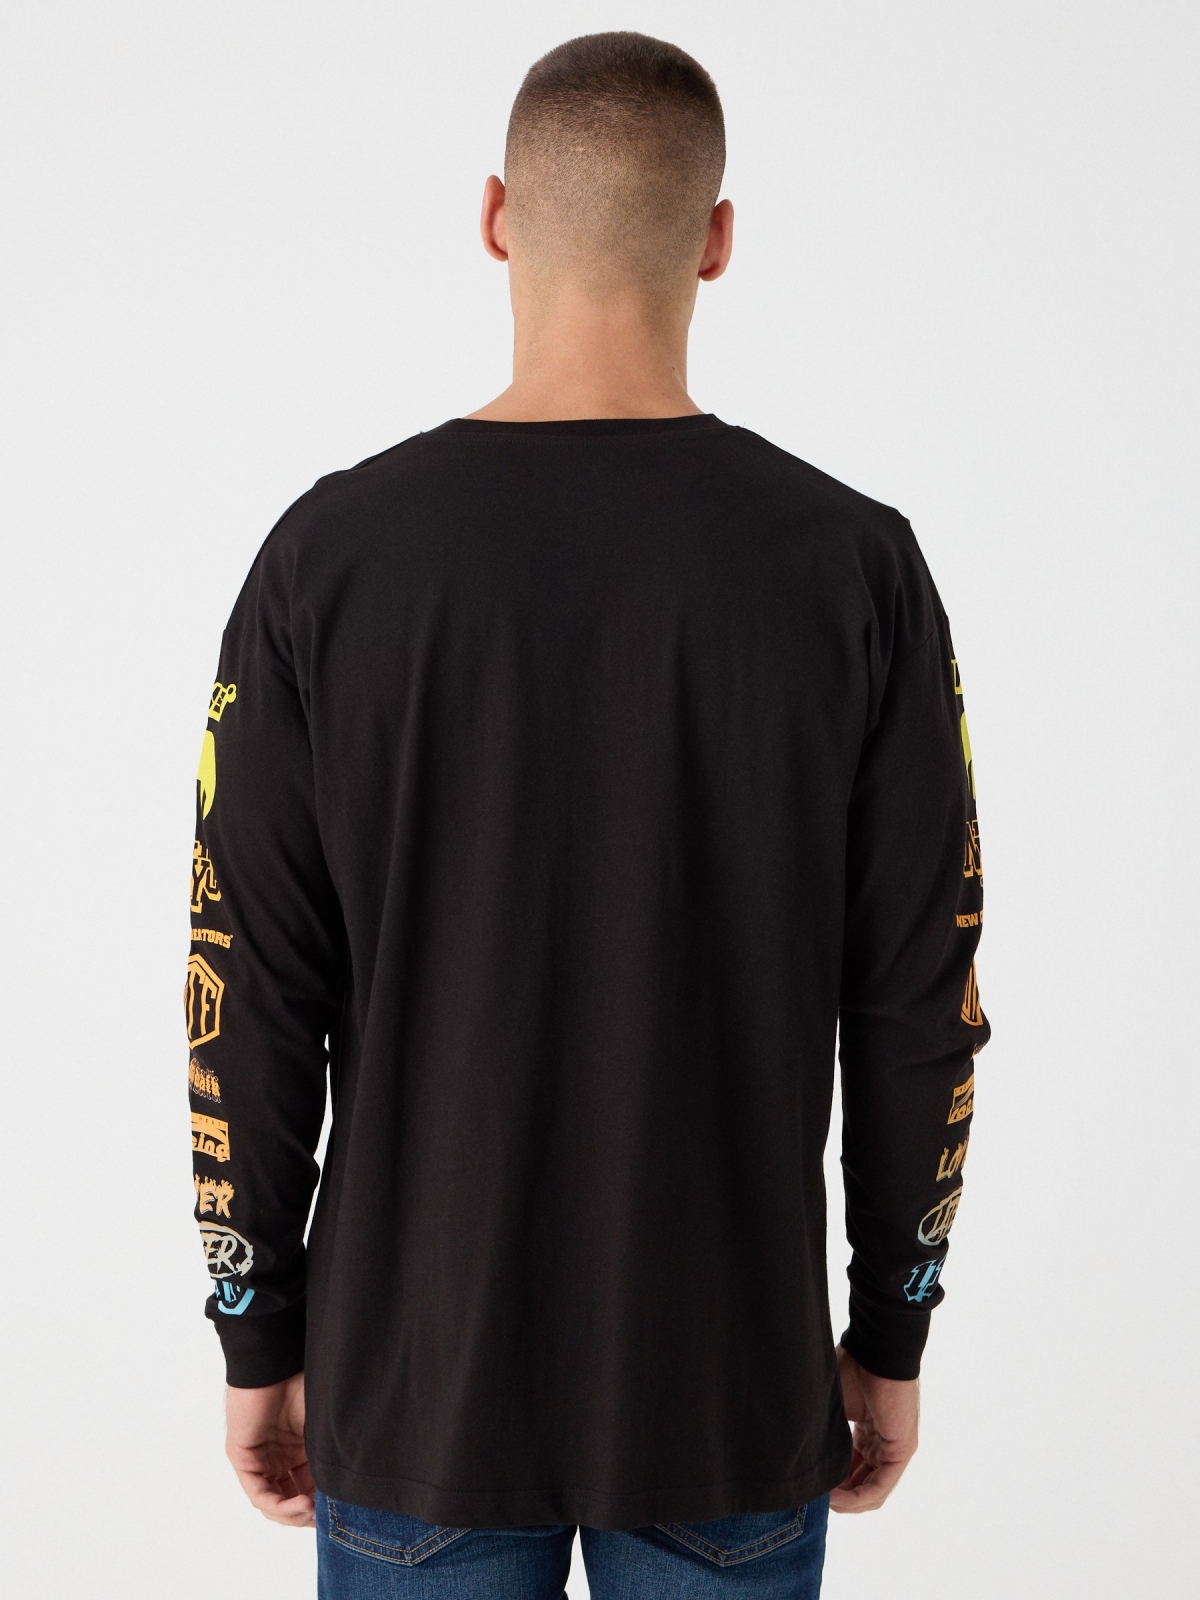 Festival printed T-shirt black middle back view